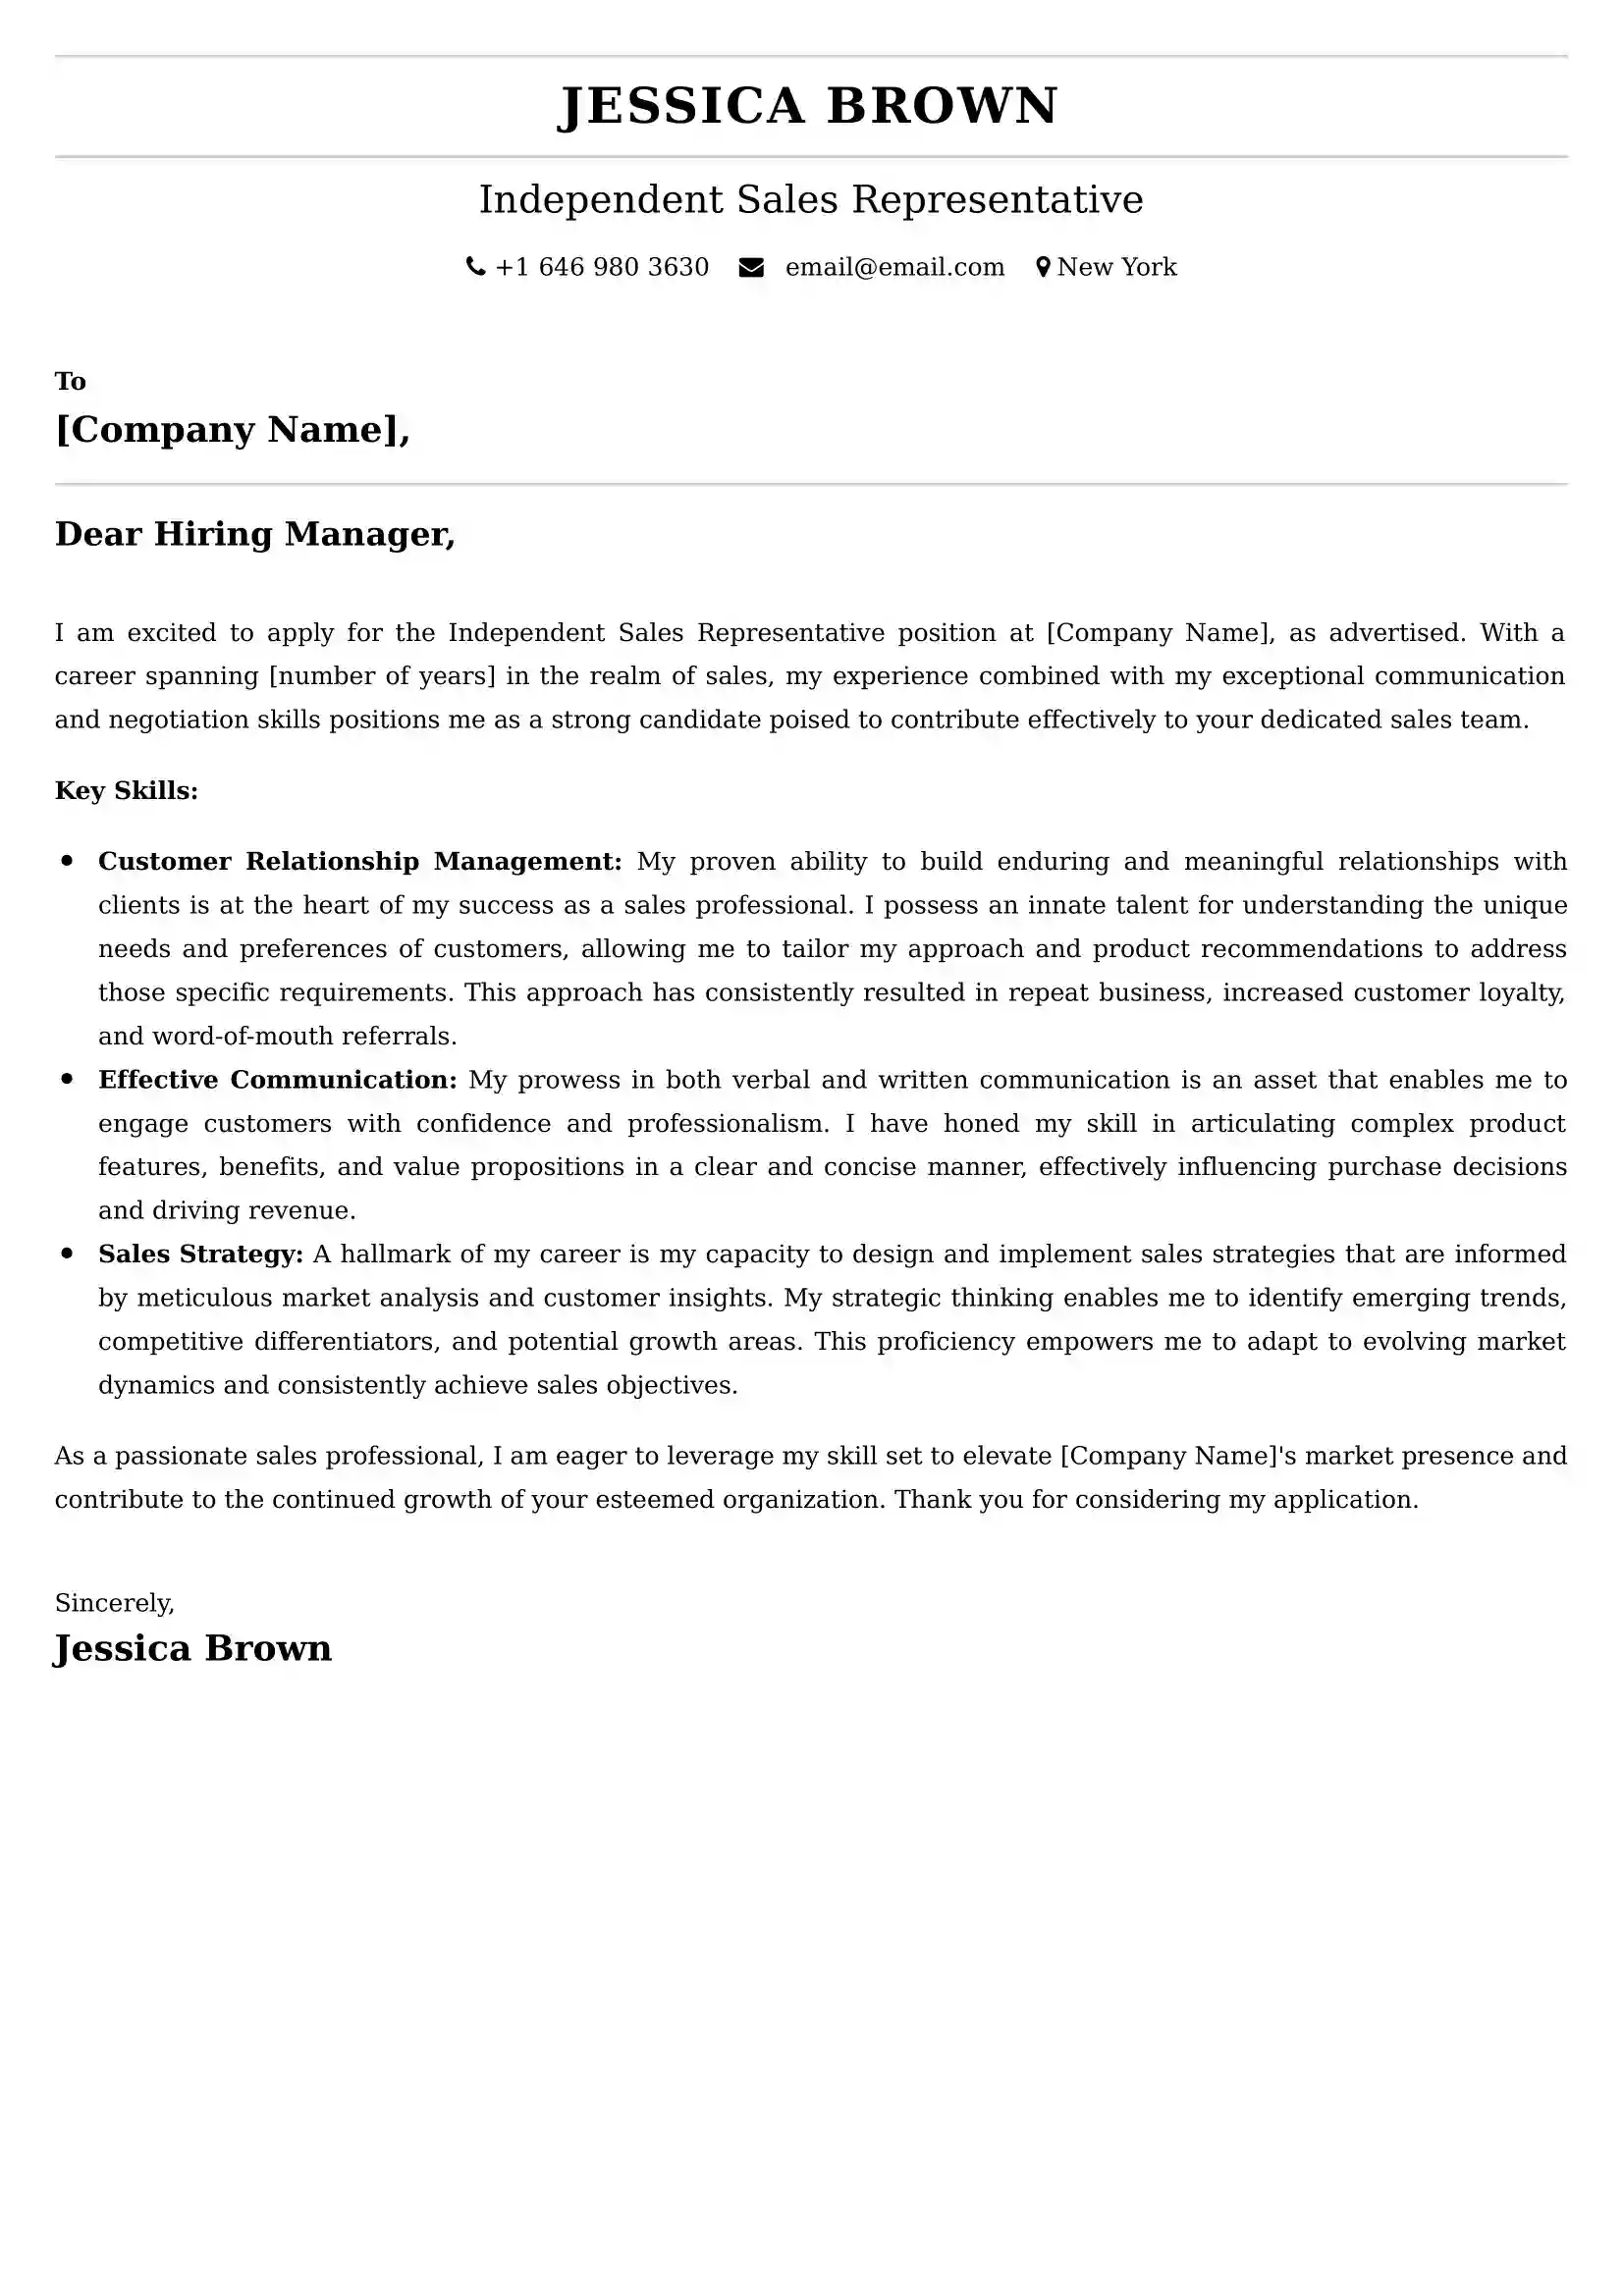 Independent Sales Representative Cover Letter Examples -Latest Brazilian Templates